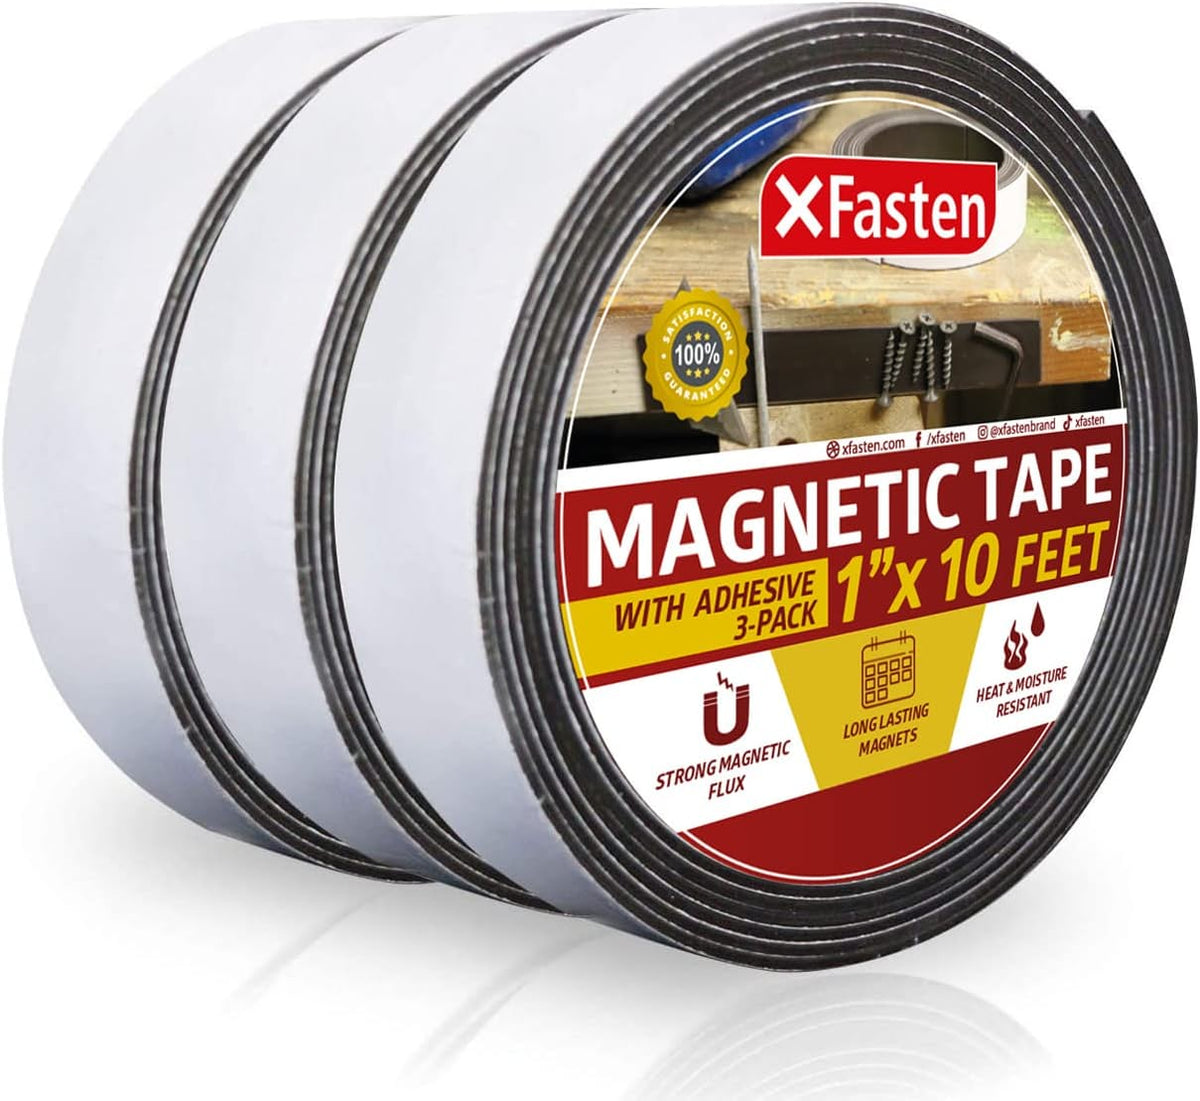 OOK 1/2-inch x 10-ft Flexible Magnetic Tape - 1 set